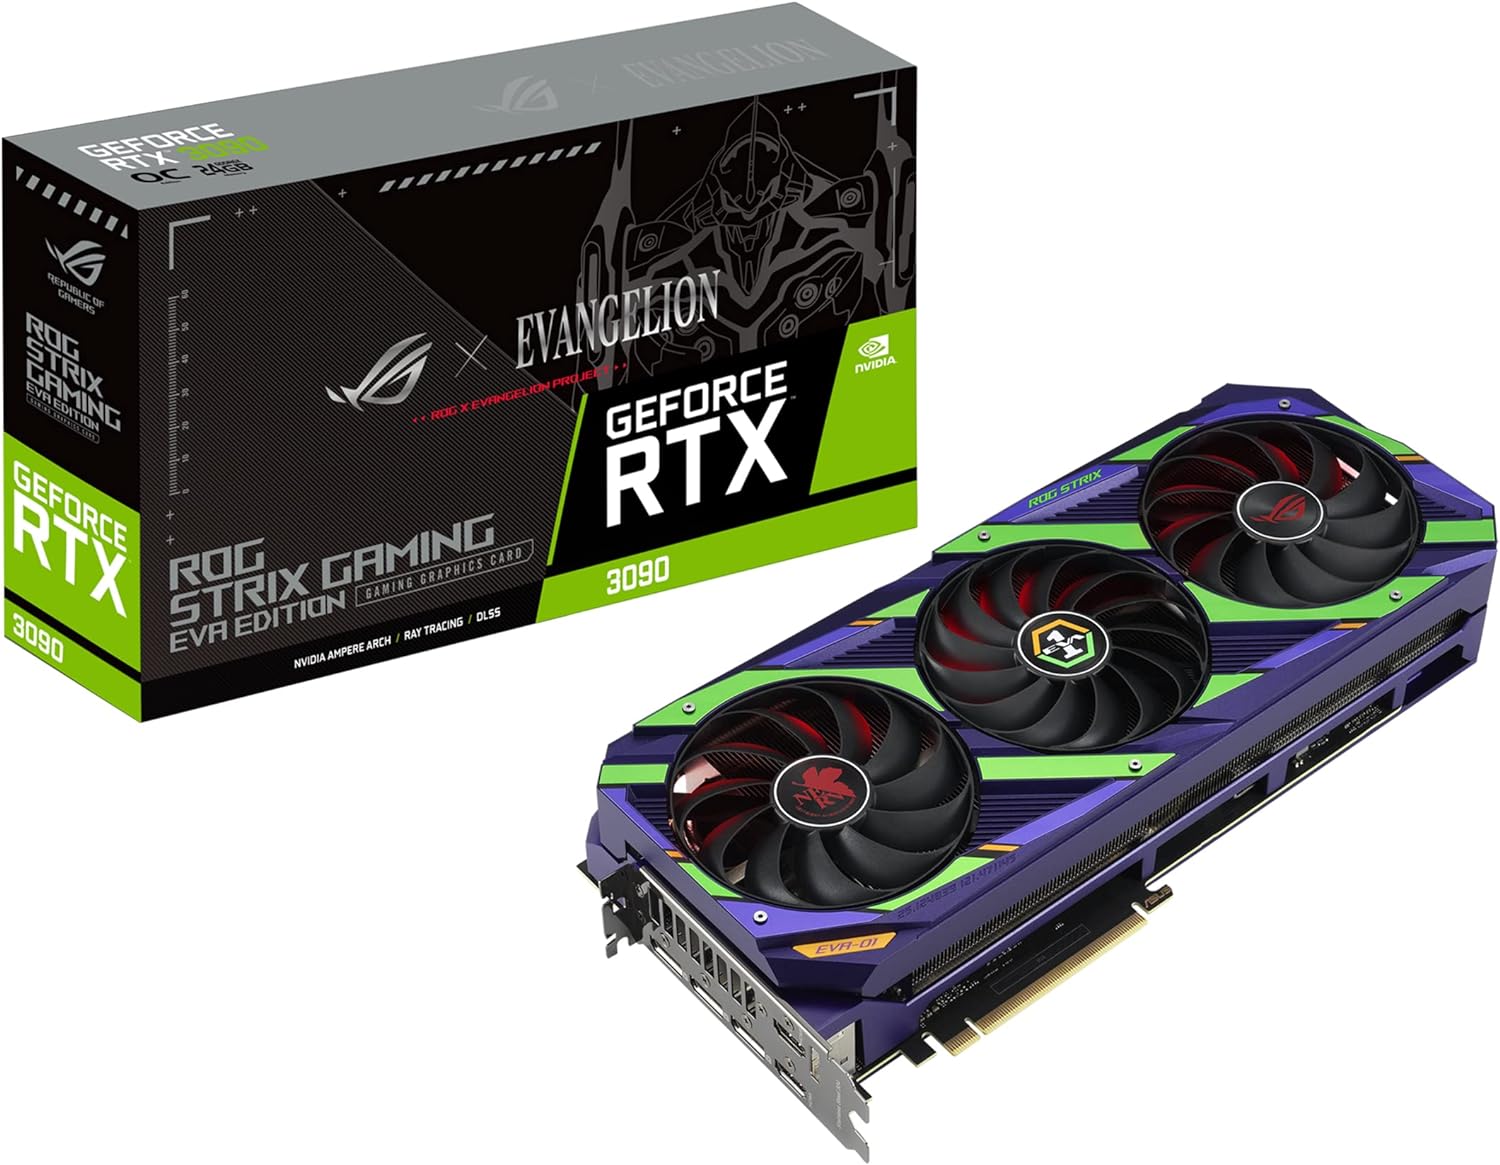 ASUS ROG Strix RTX 3090 EVA Edition Gaming Card: Officially Licensed Limited Edition GPU by ASUS ROG. 0195553721226